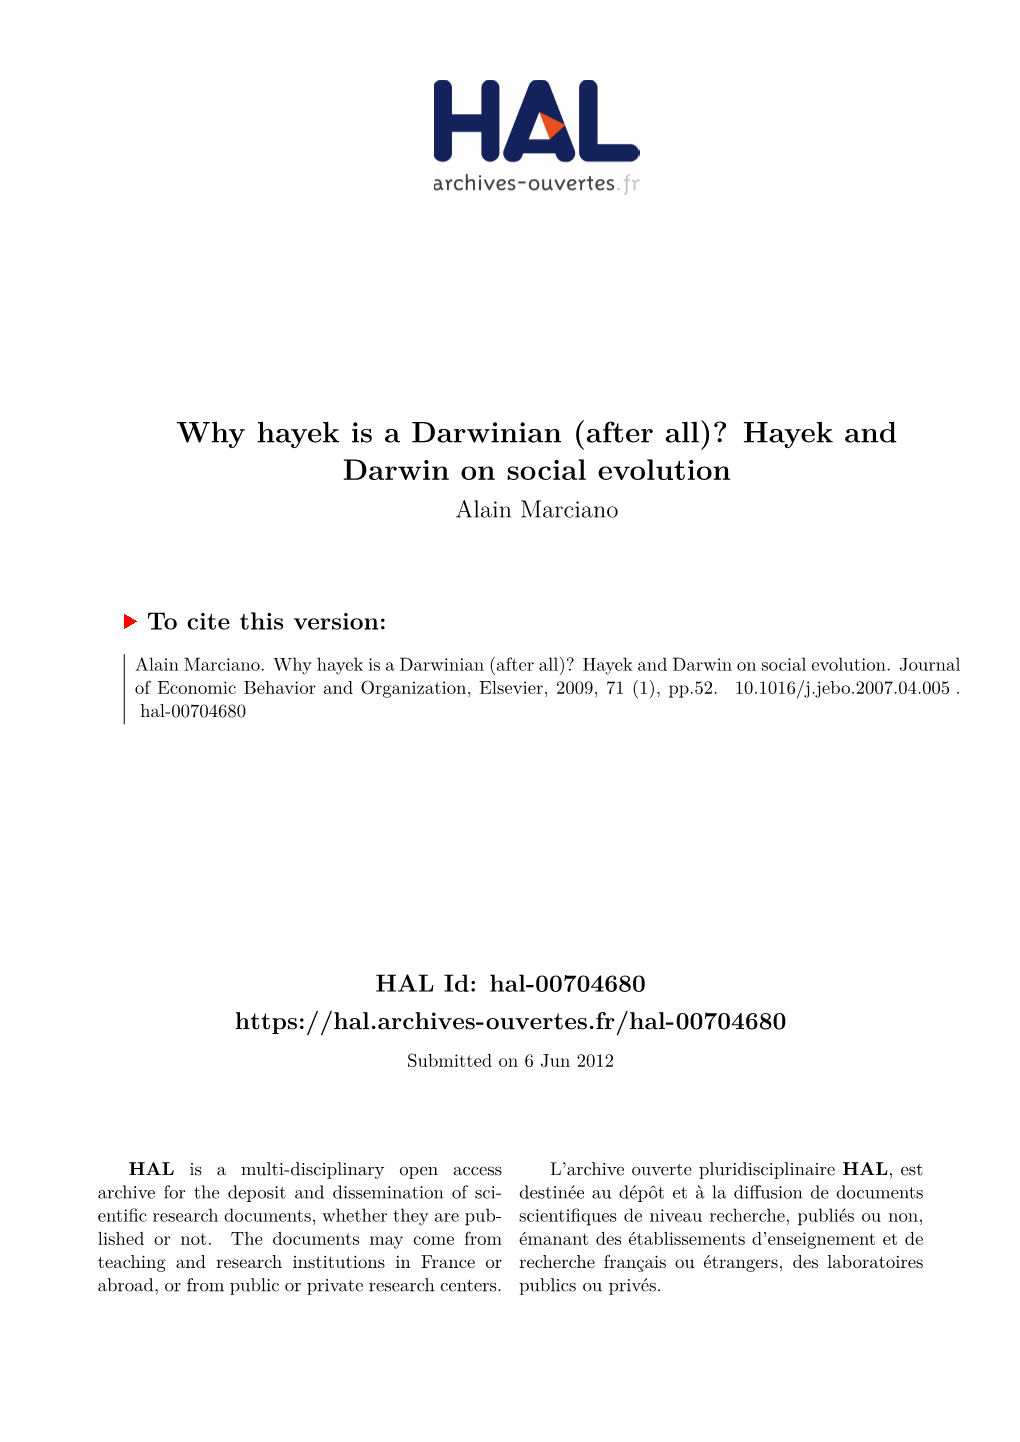 (After All)? Hayek and Darwin on Social Evolution Alain Marciano